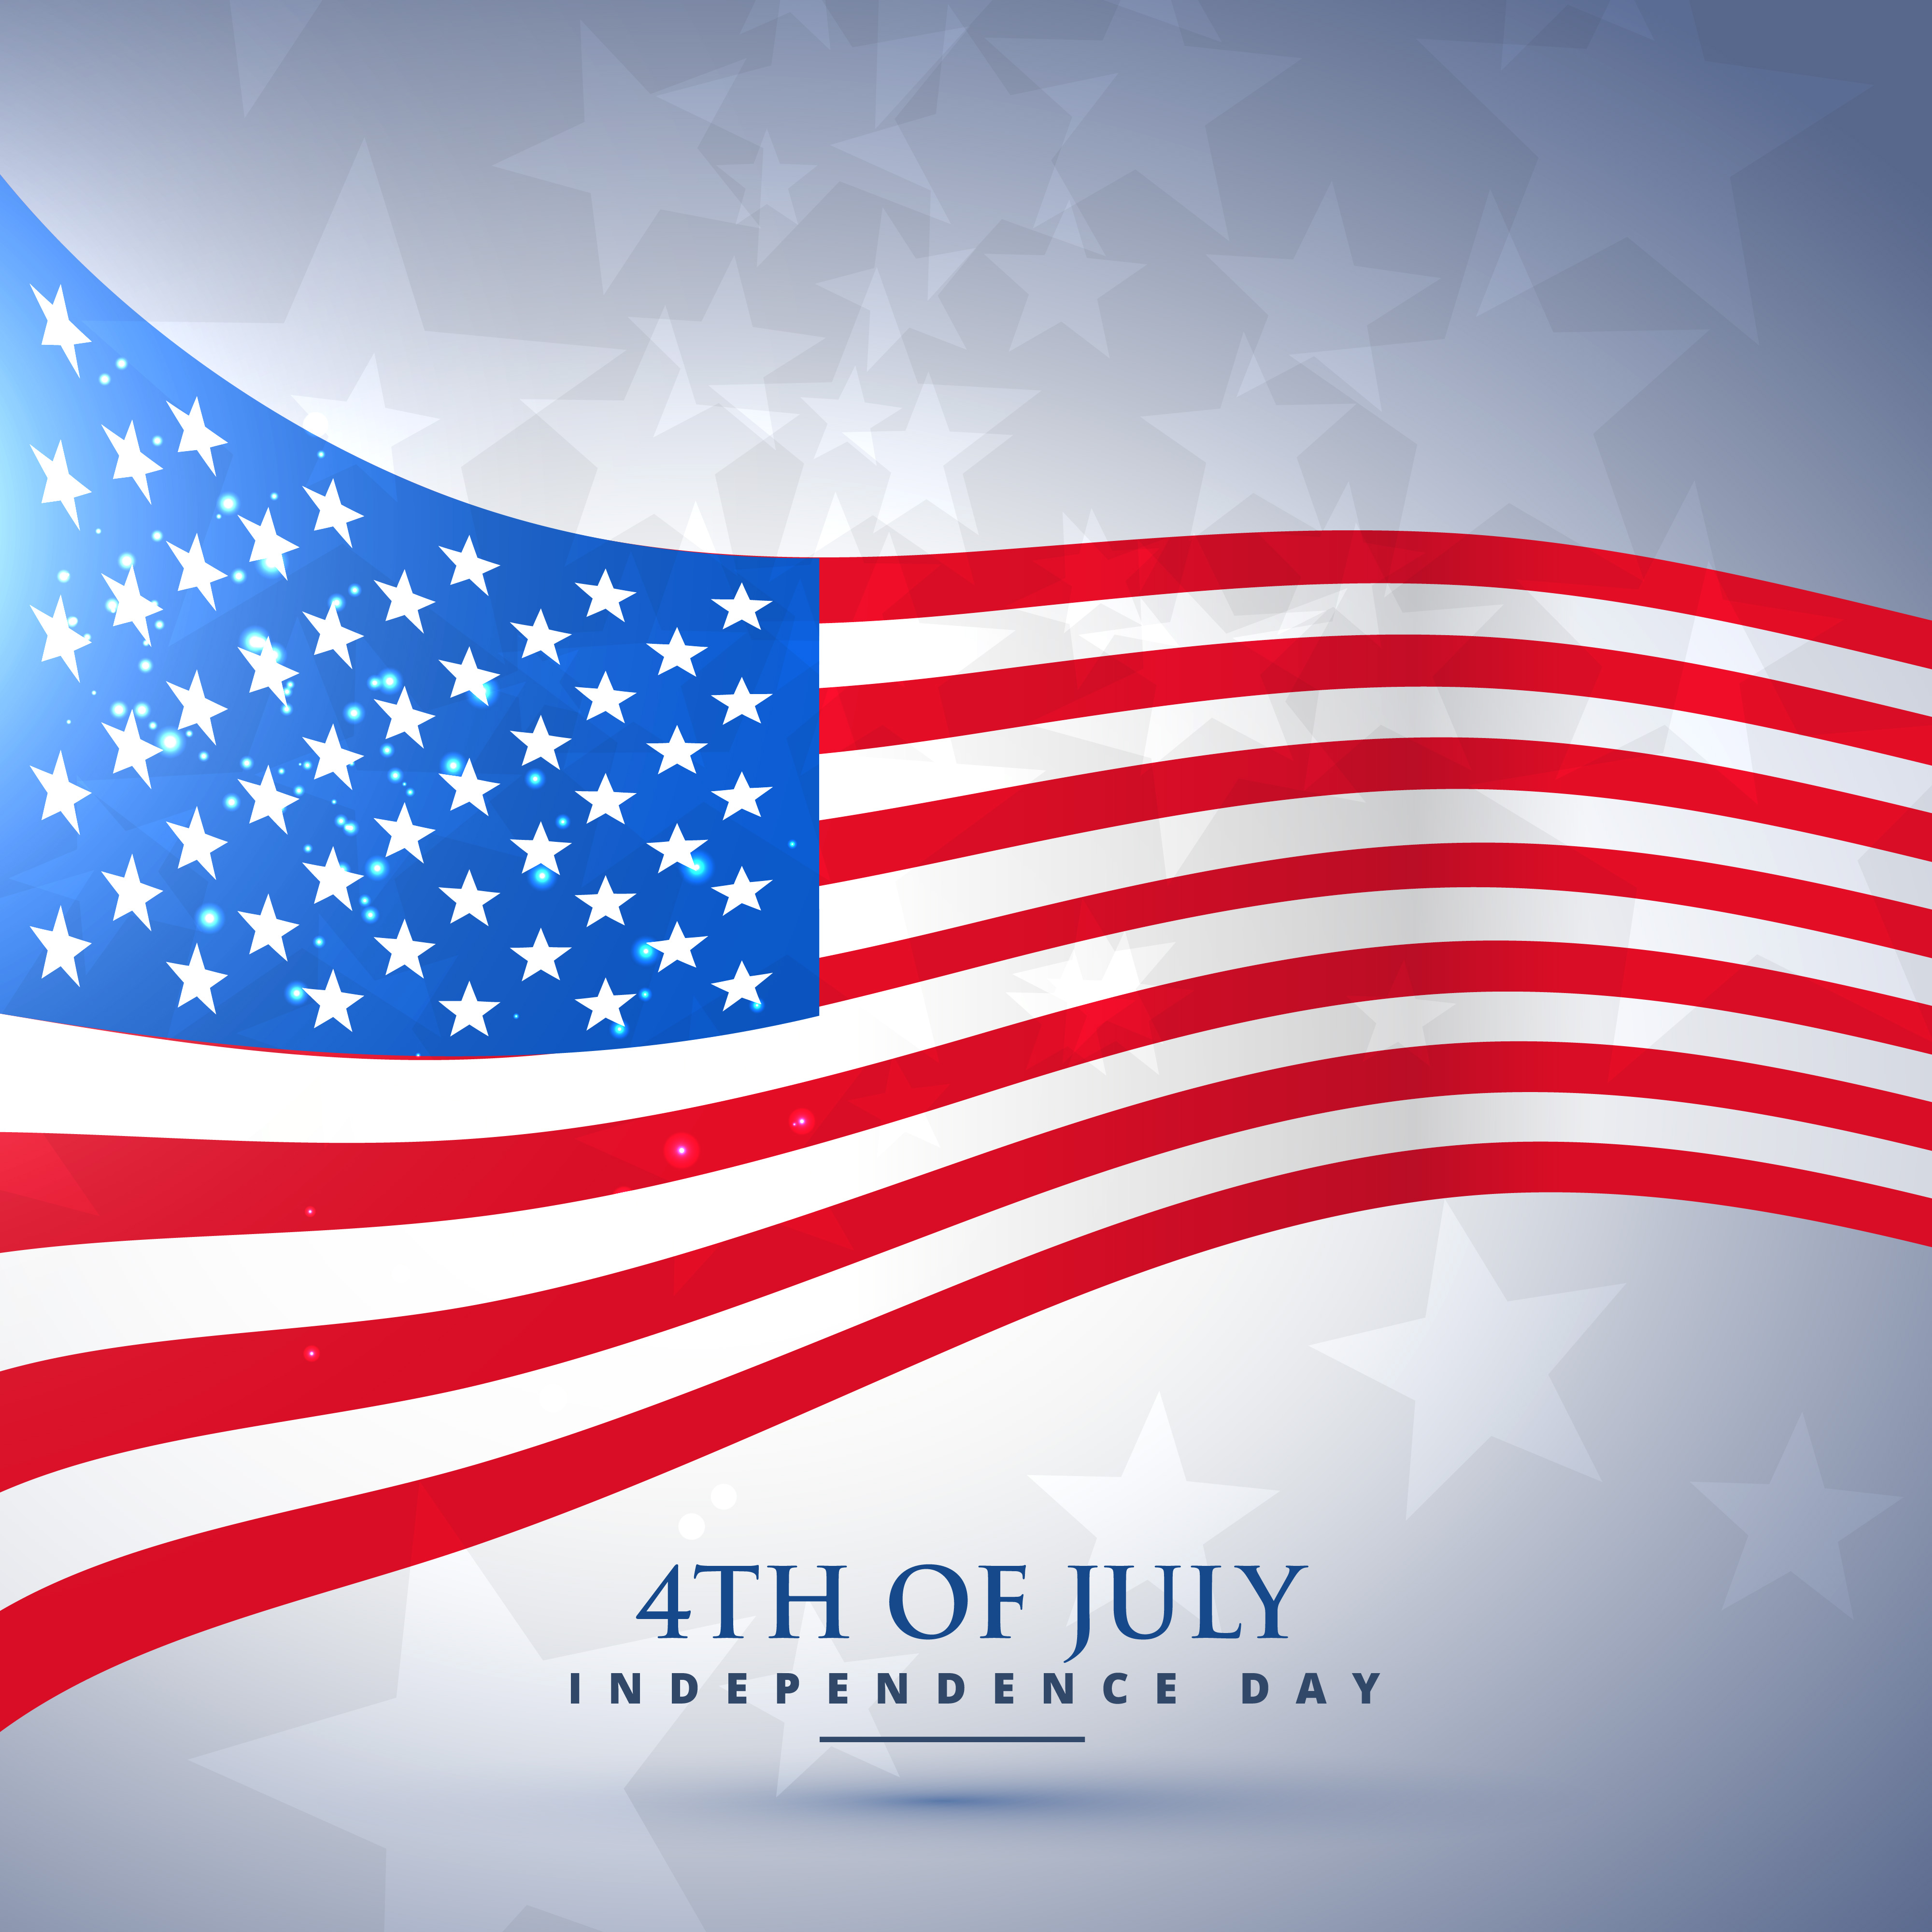 Download american flag in wave style - Download Free Vector Art ...